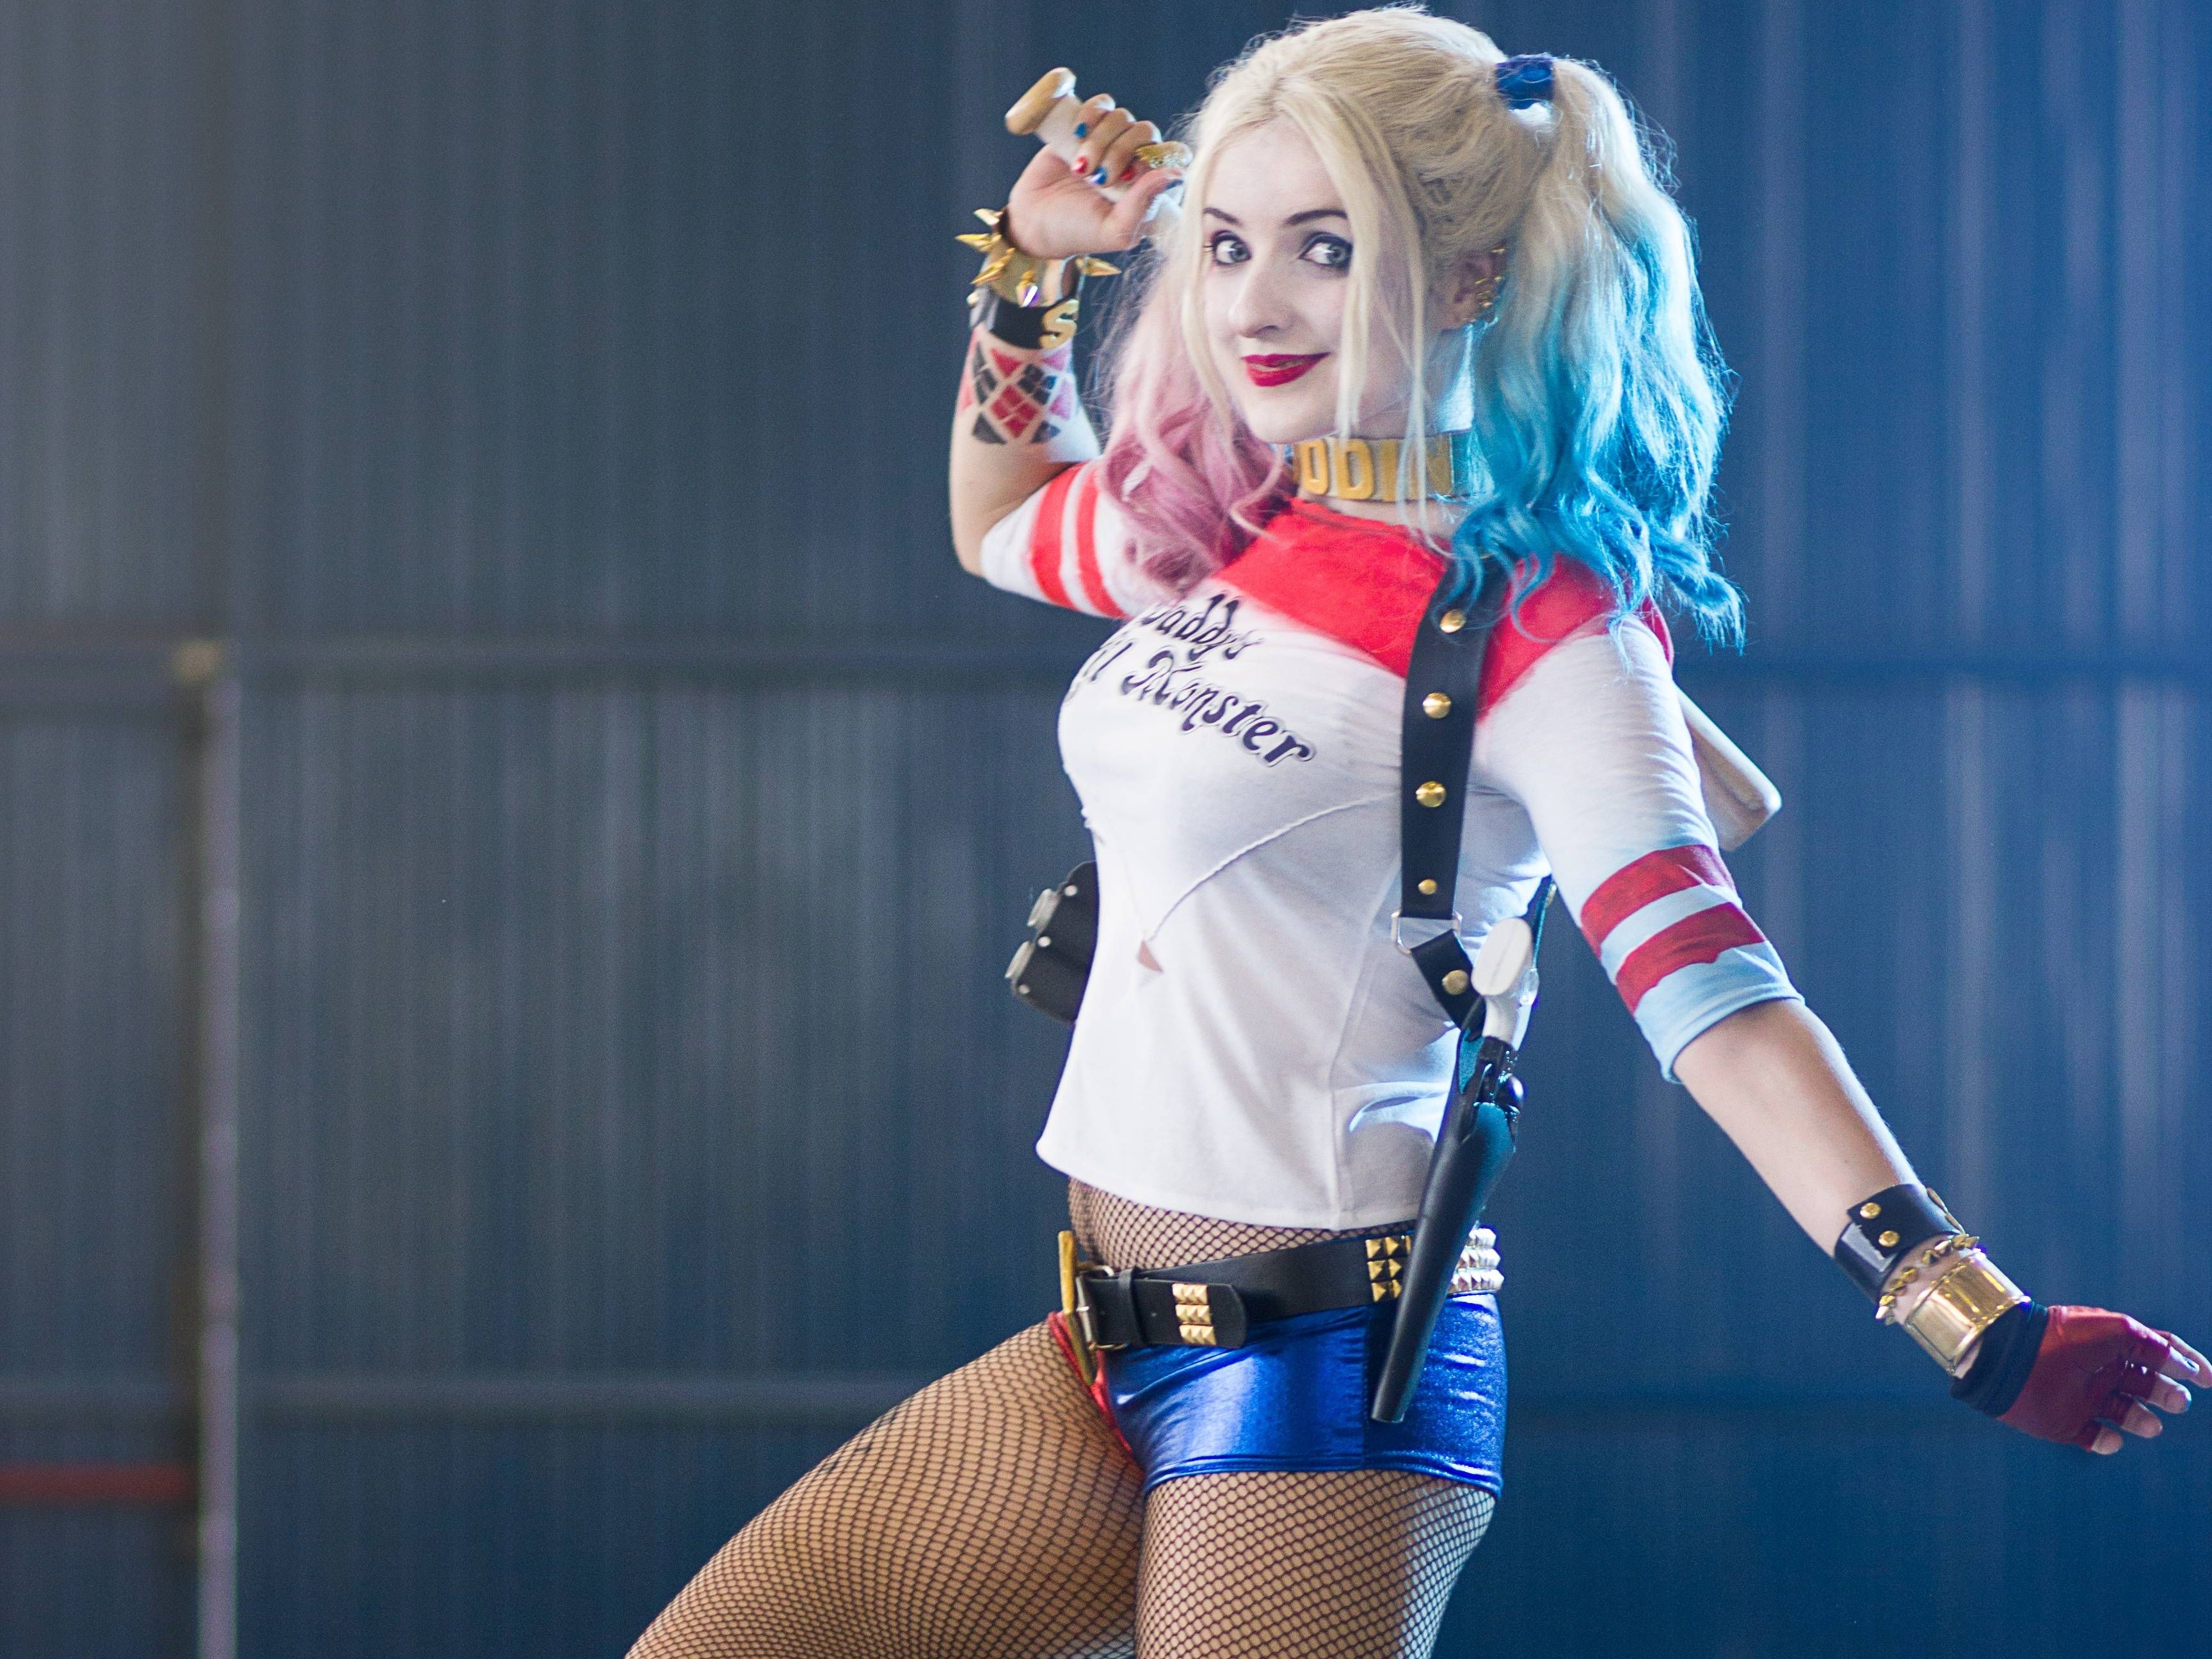 Harley Quinn HD Wallpaper and Background Image